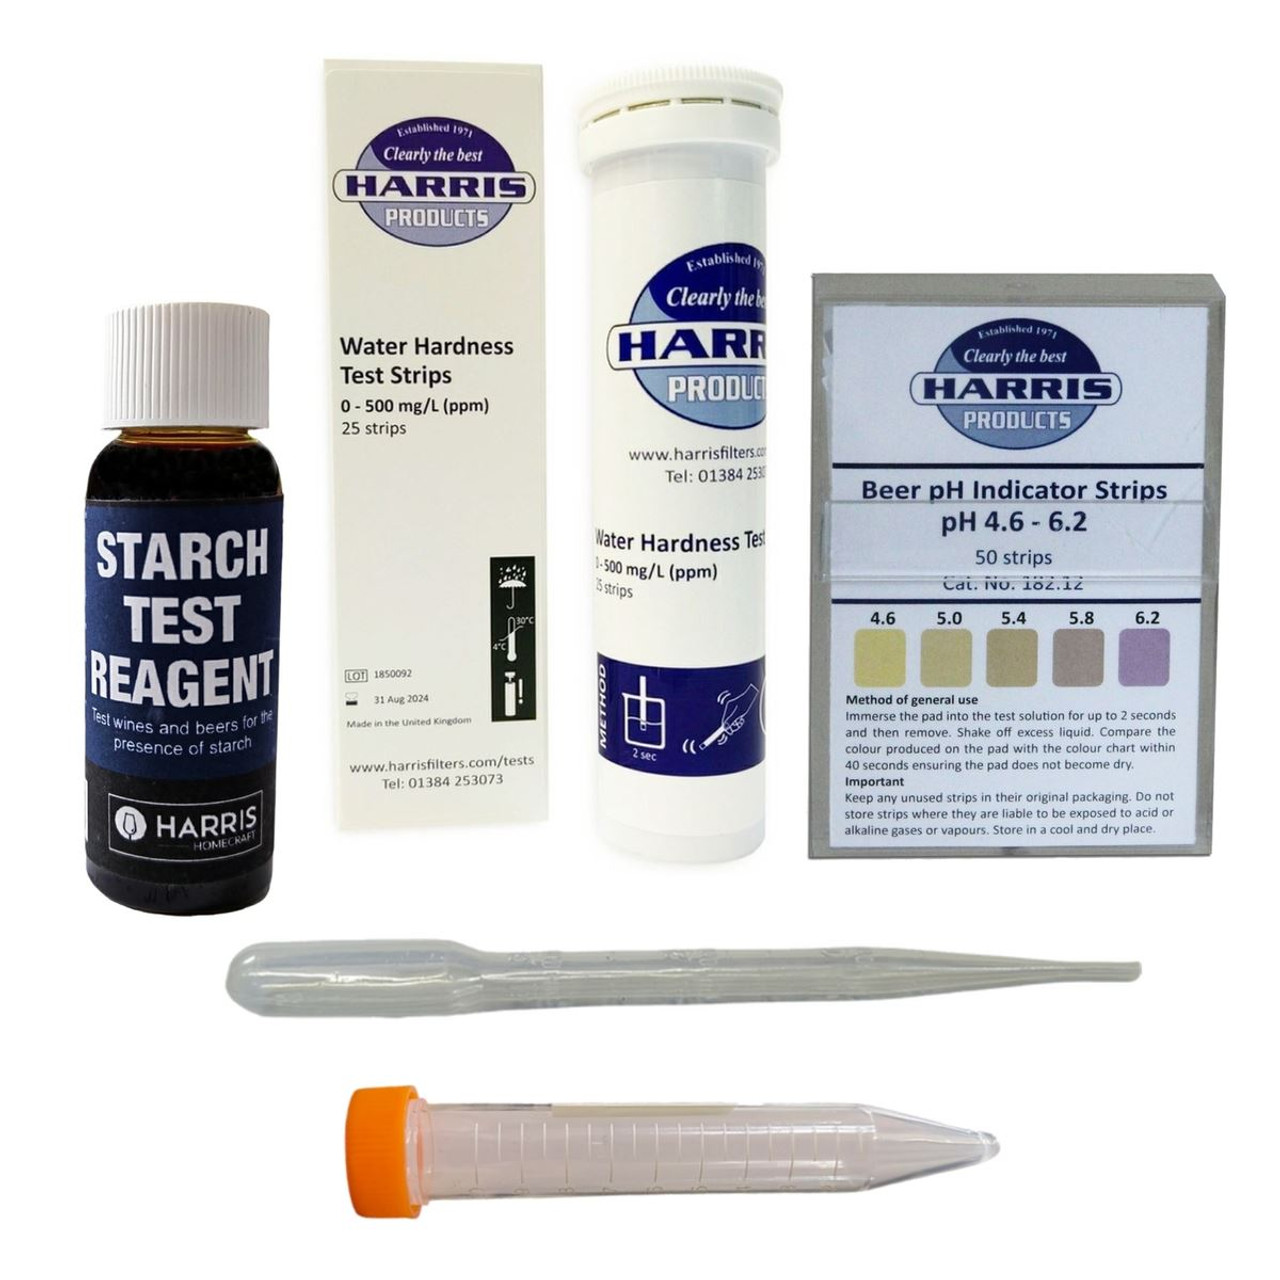 Harris Beermakers Test Kit to analys water and wort to maximise performance